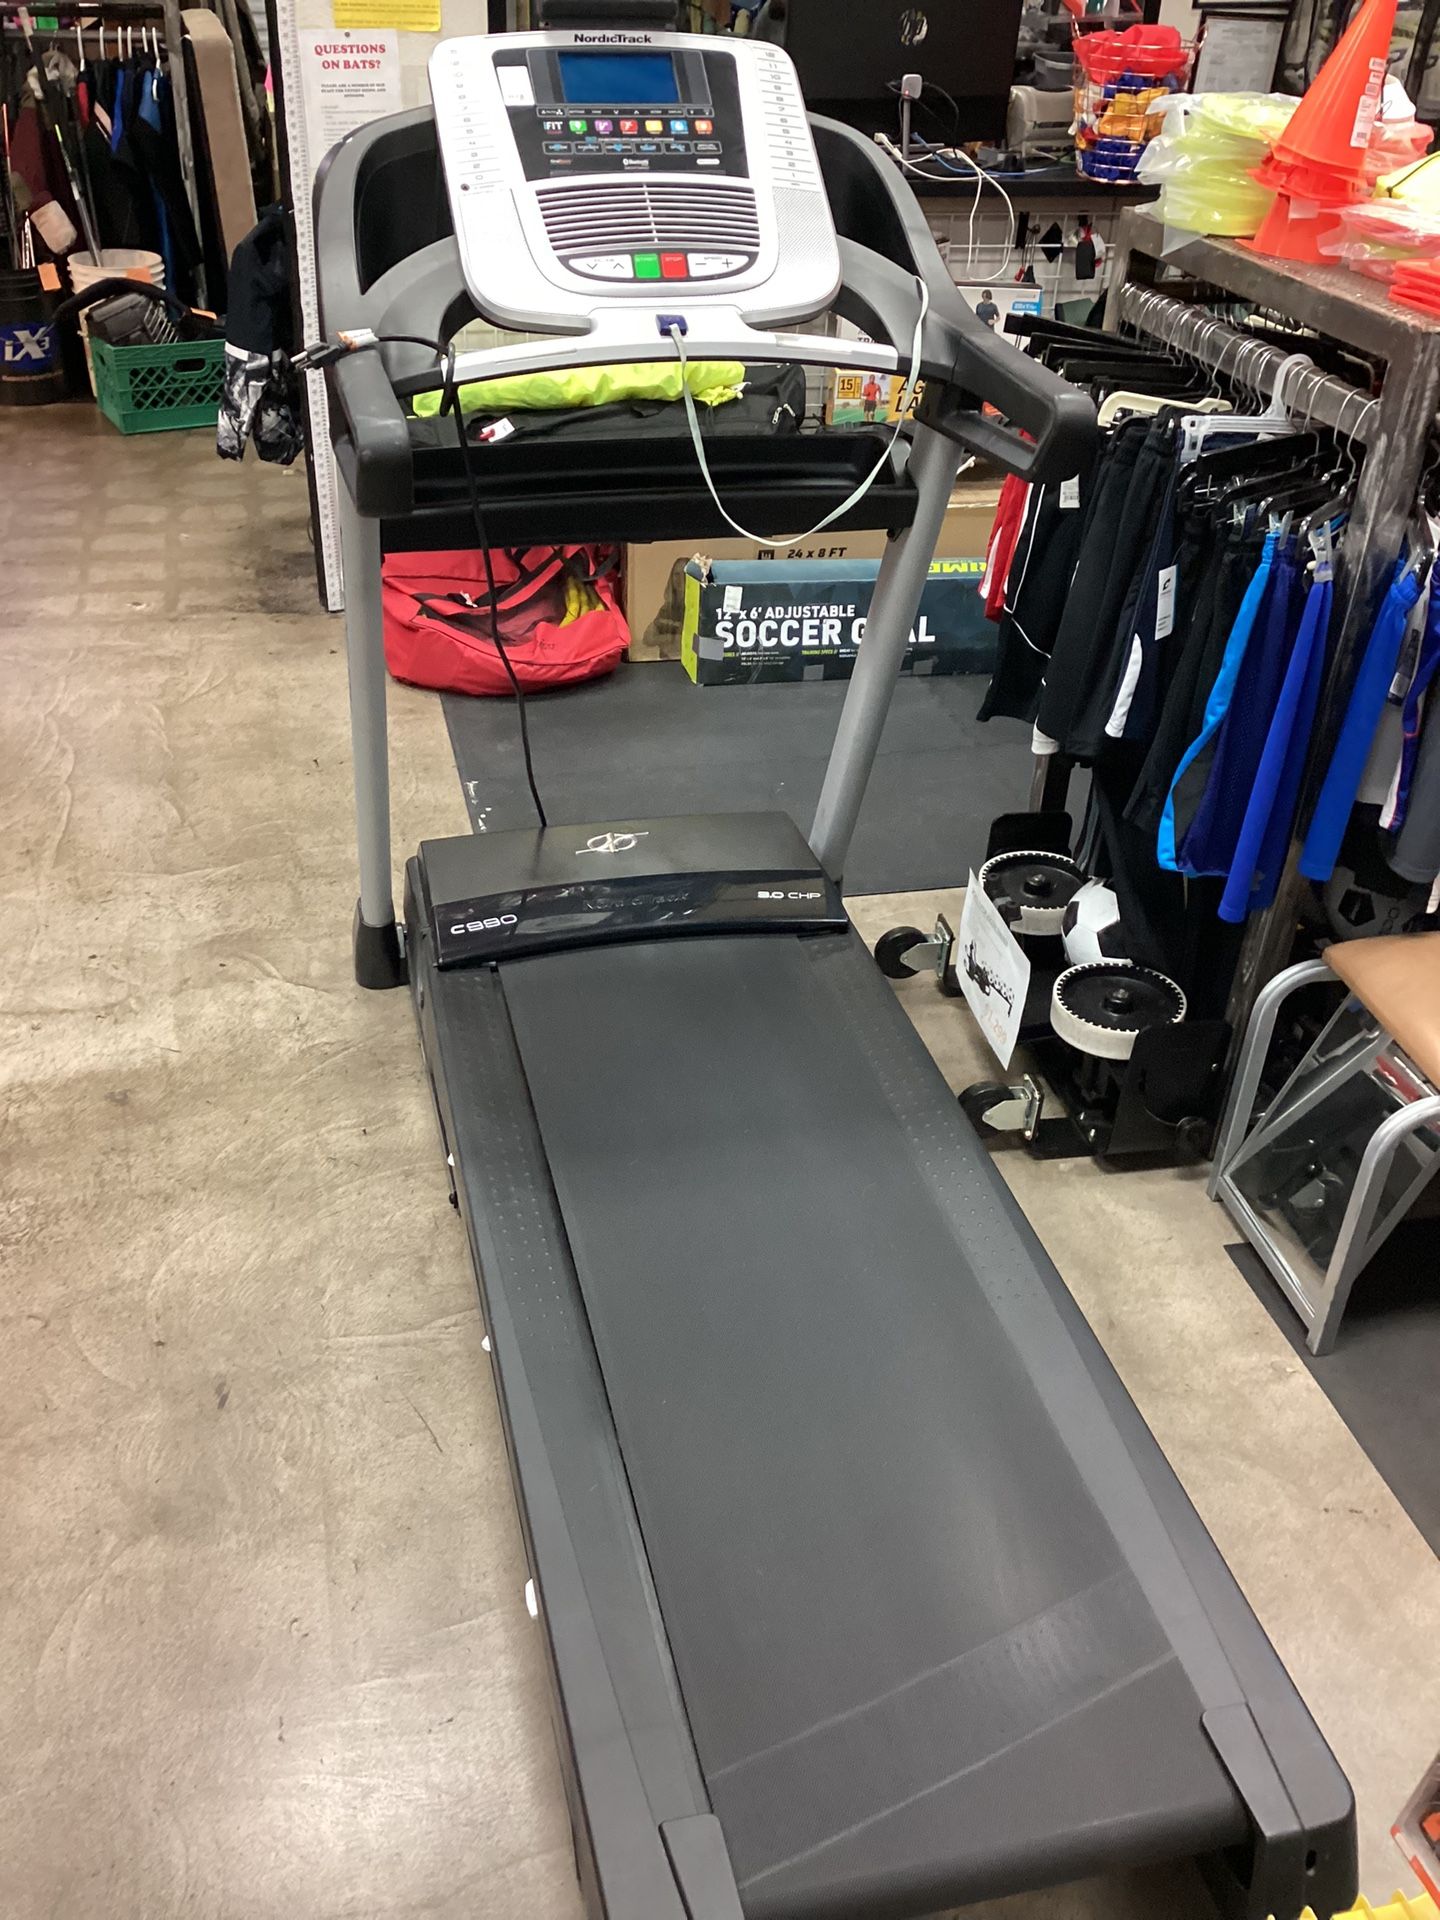 NordicTrack C 990 Treadmill w/ iFIT (Delivery Is Available)